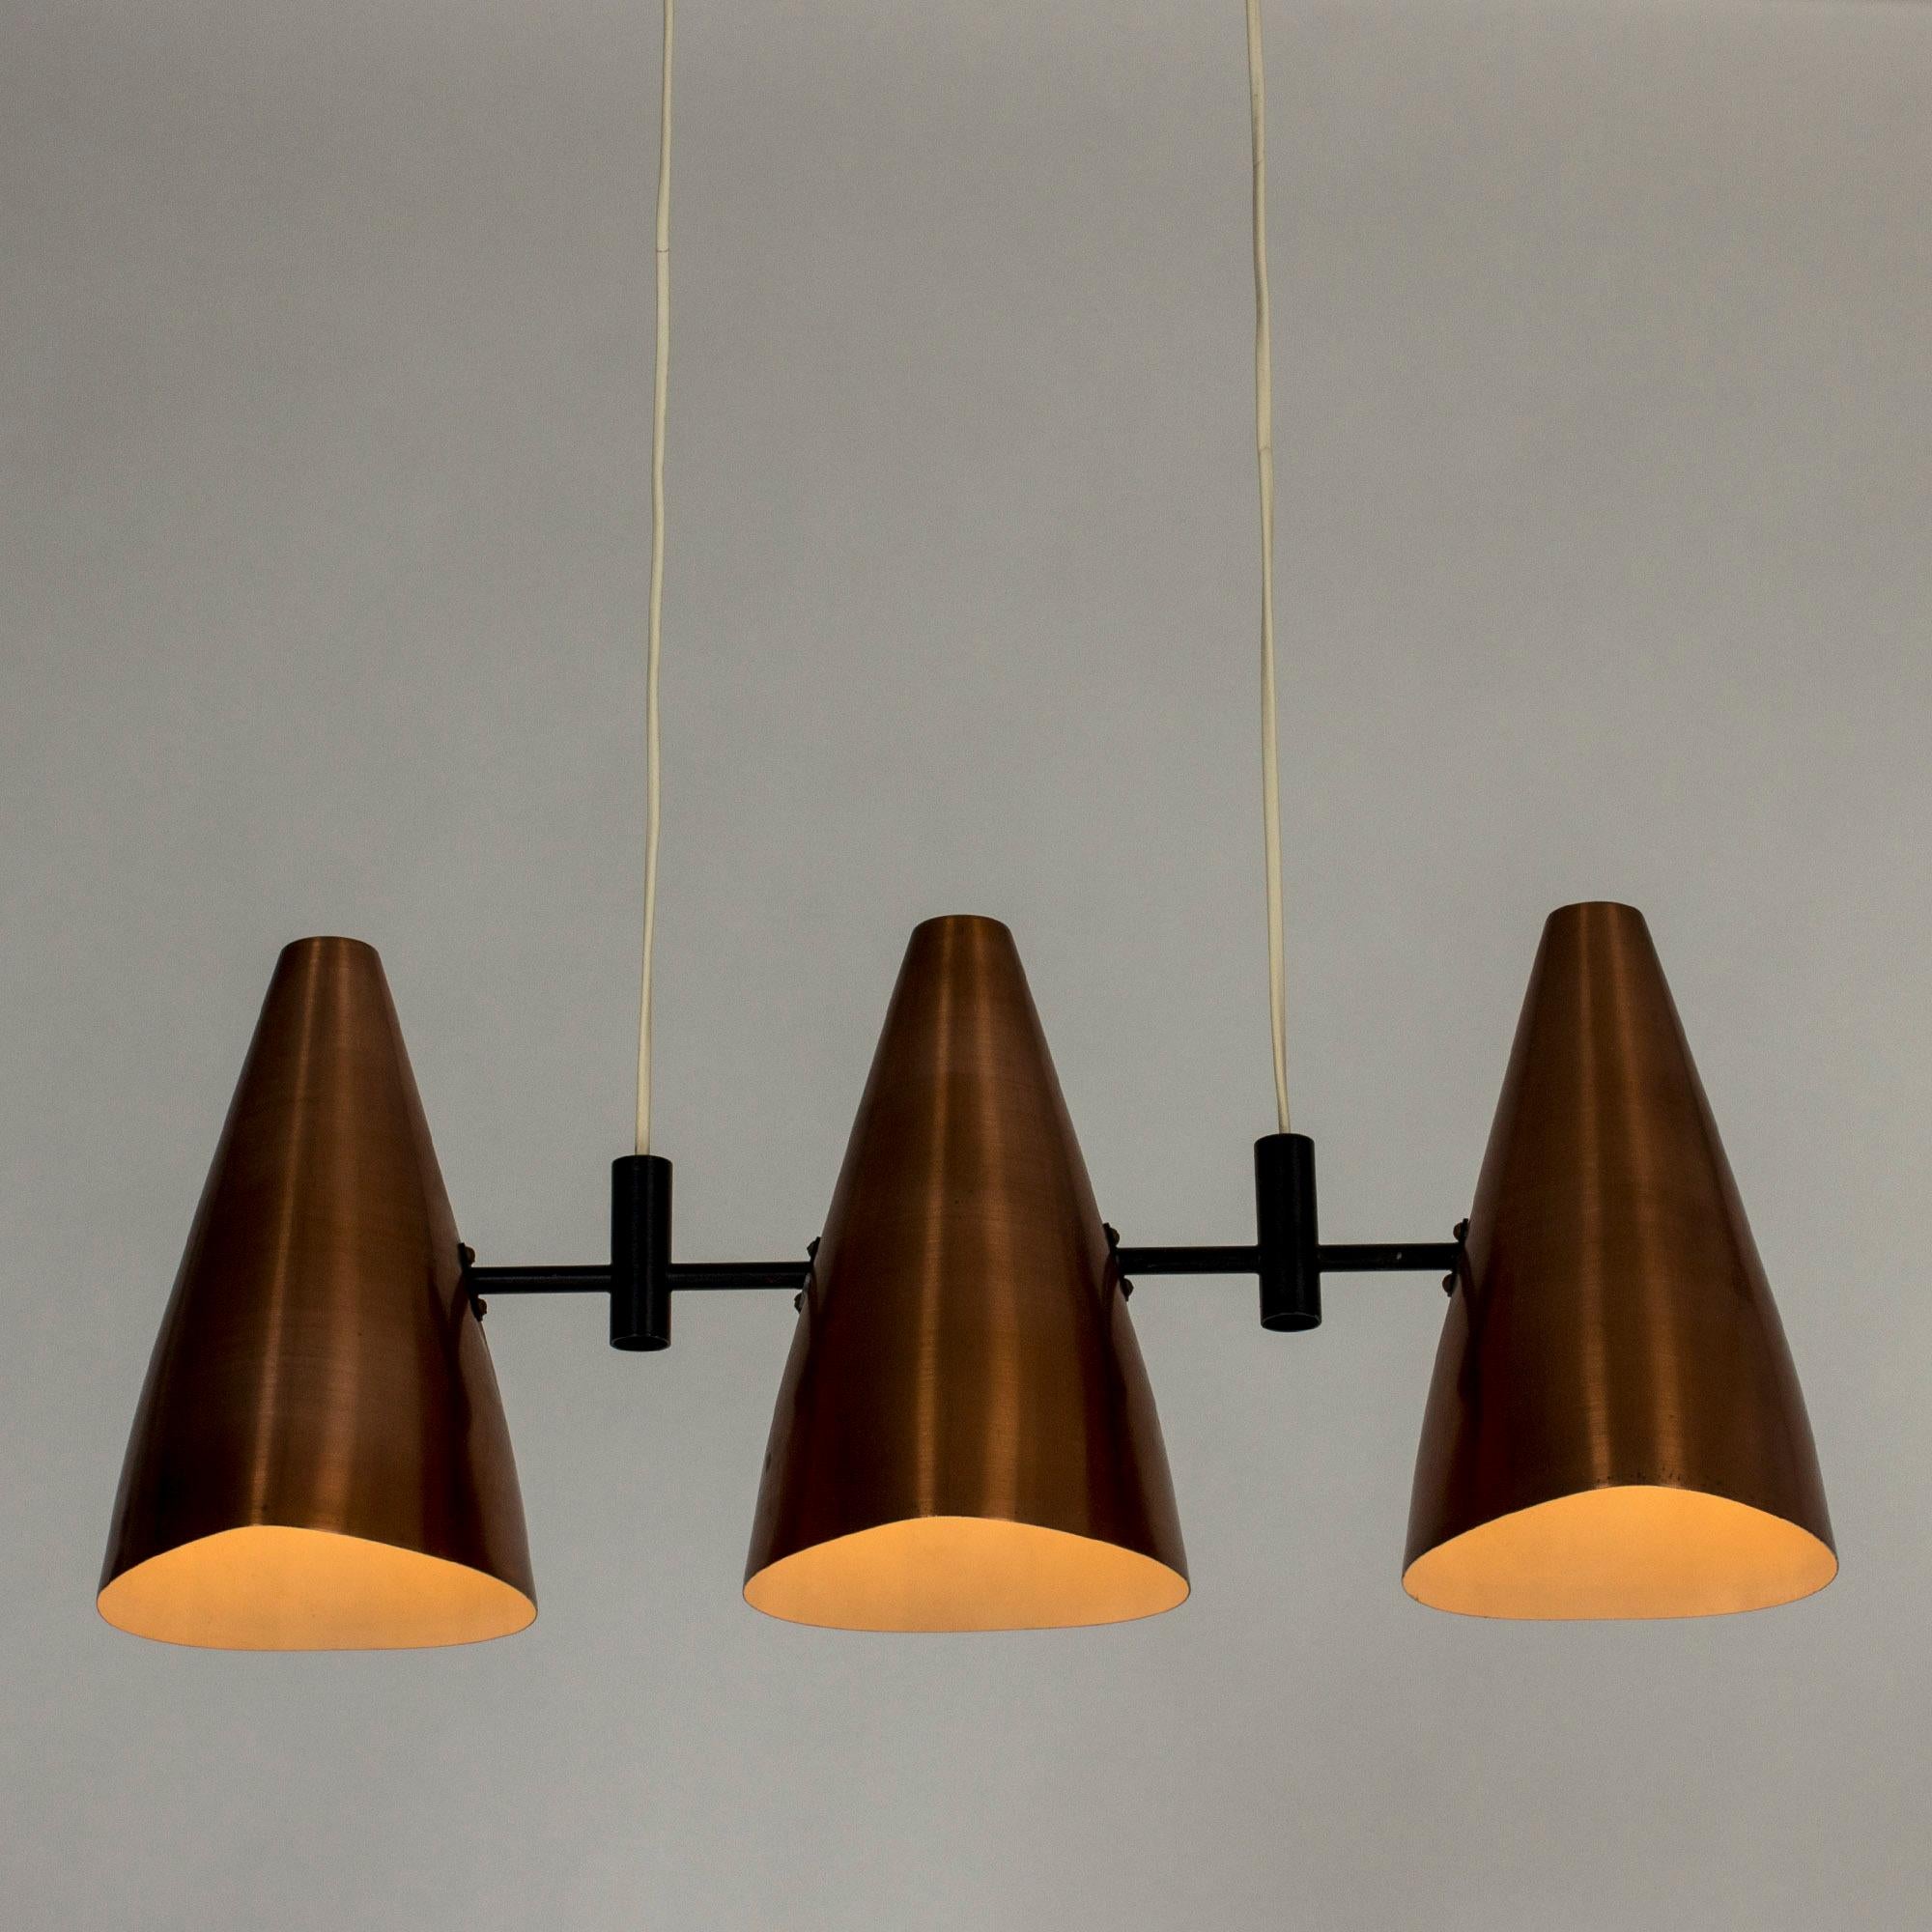 Very cool ceiling lamp by Eje Ahlgren, with three copper shades. Sleek graphic look with black lacquered details and a long, boxy ceiling cup.